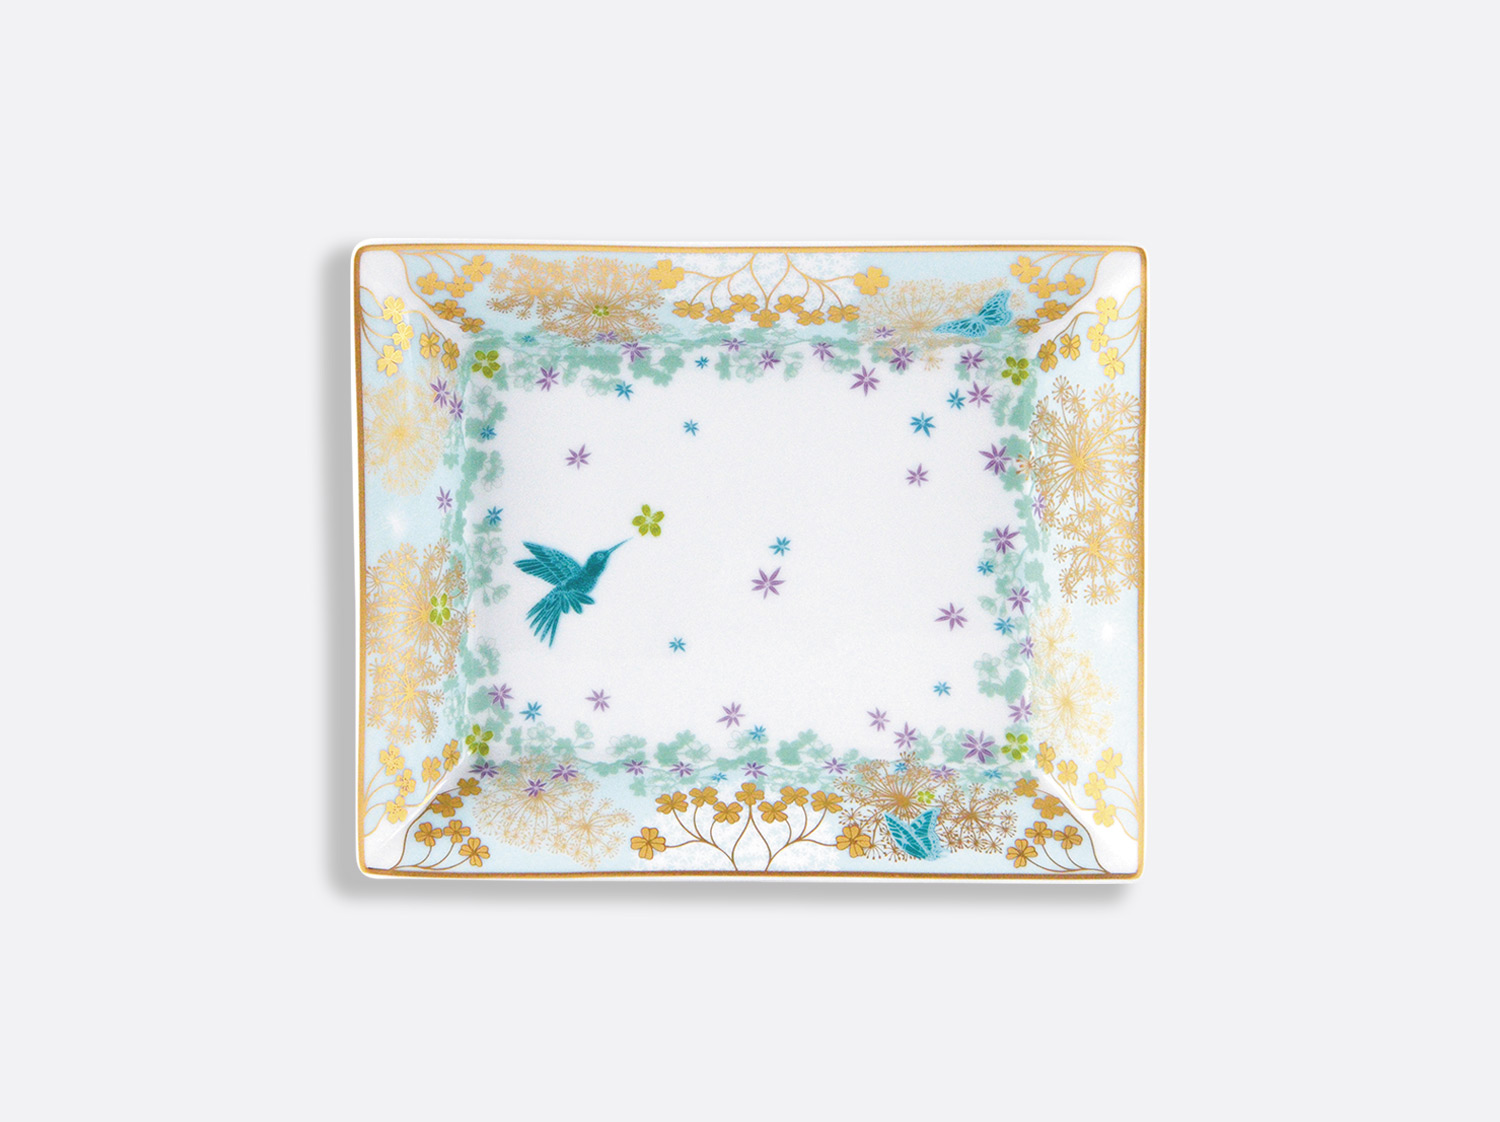 China Valet tray 7.9 x 6.3" of the collection FÉERIE - MICHAËL CAILLOUX | Bernardaud